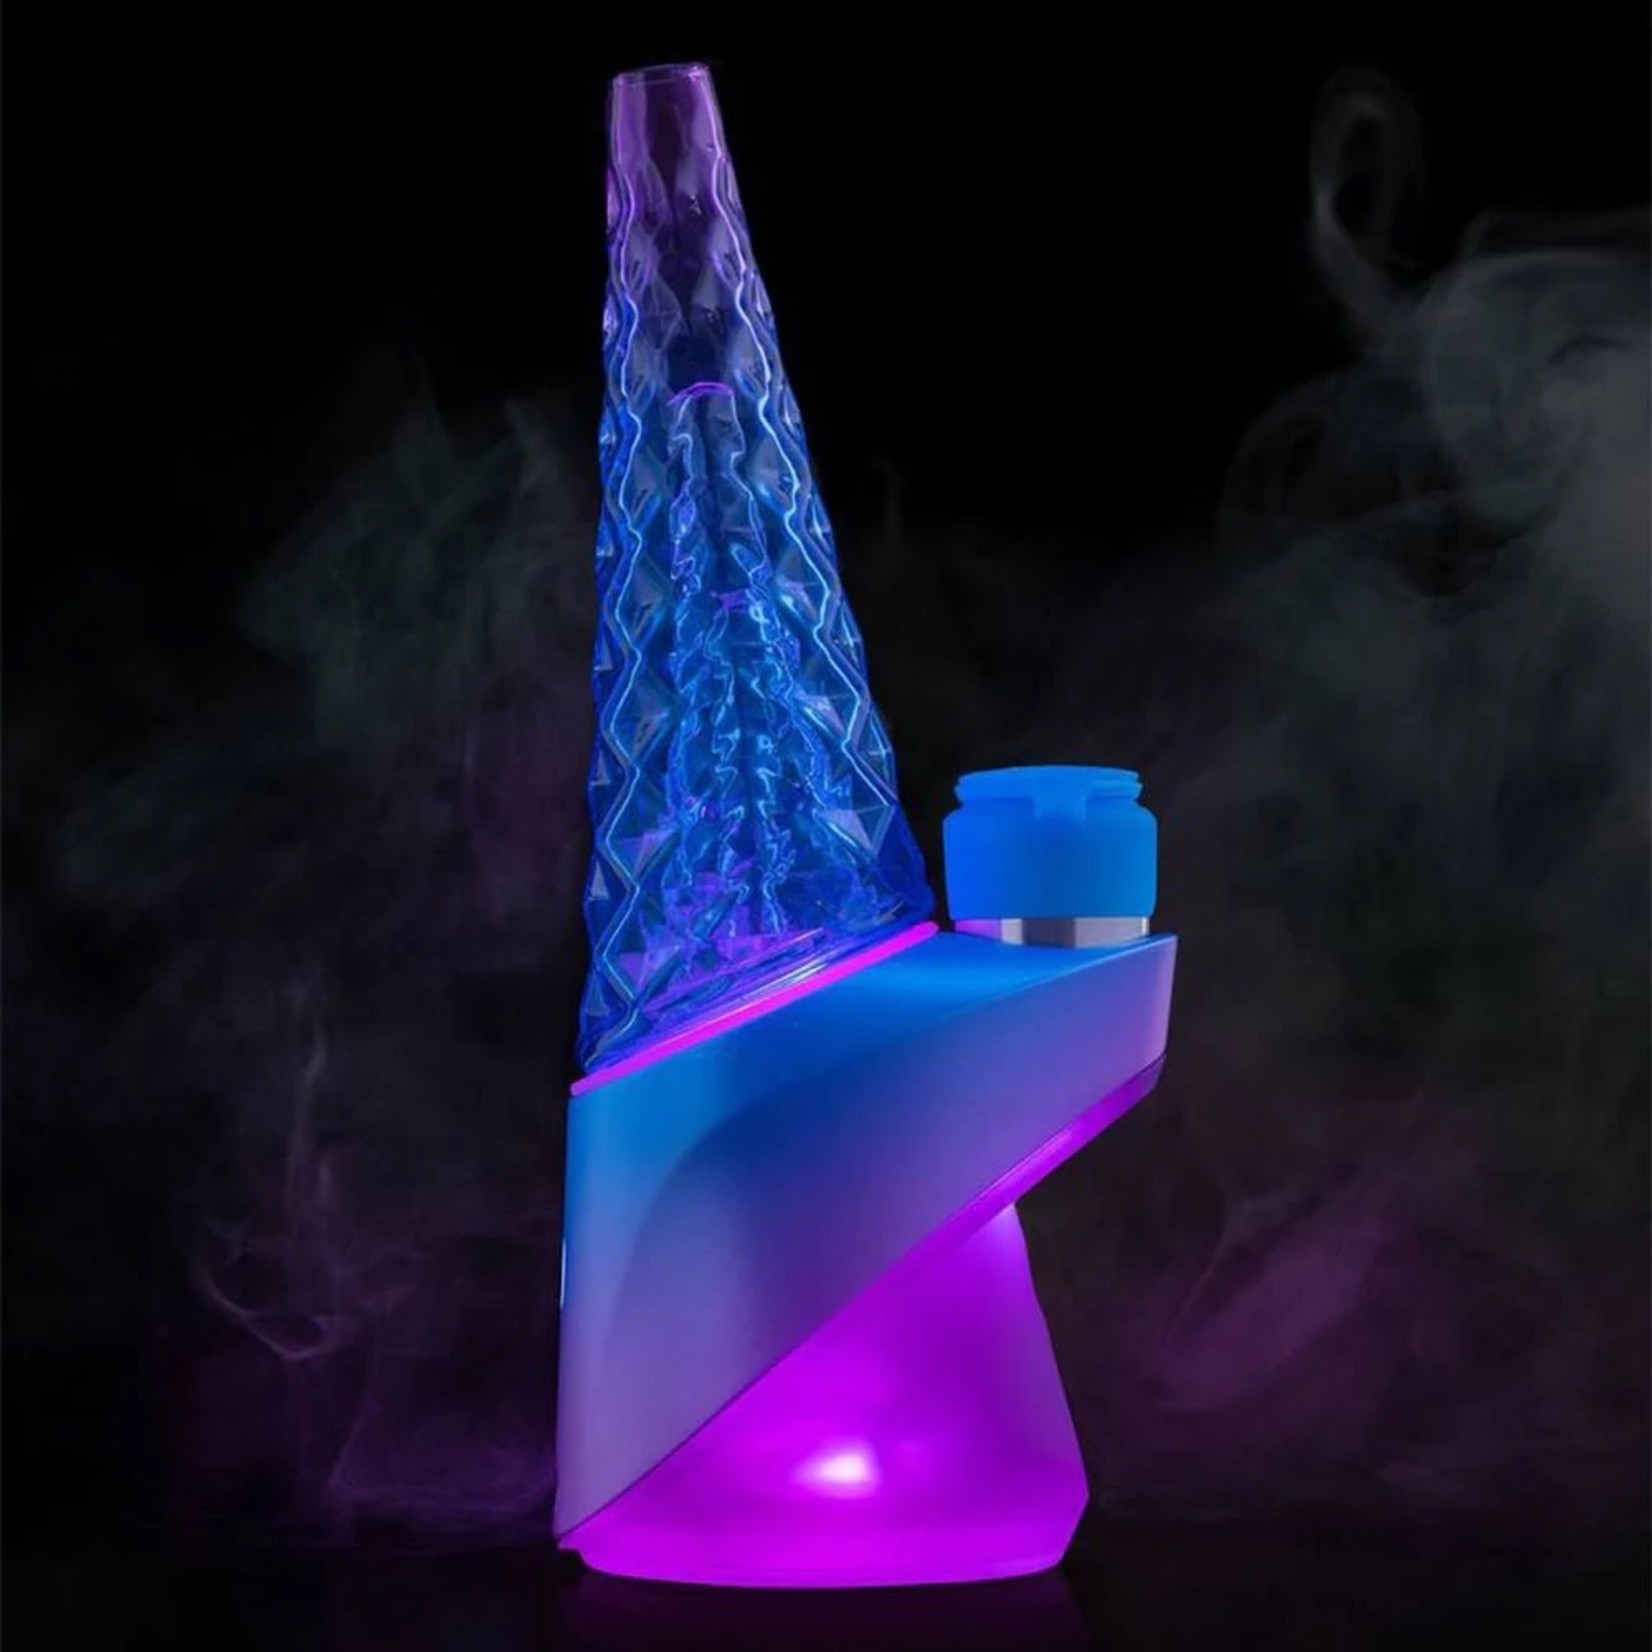 Puffco Puffco Peak Pro Limited Edition Indiglow